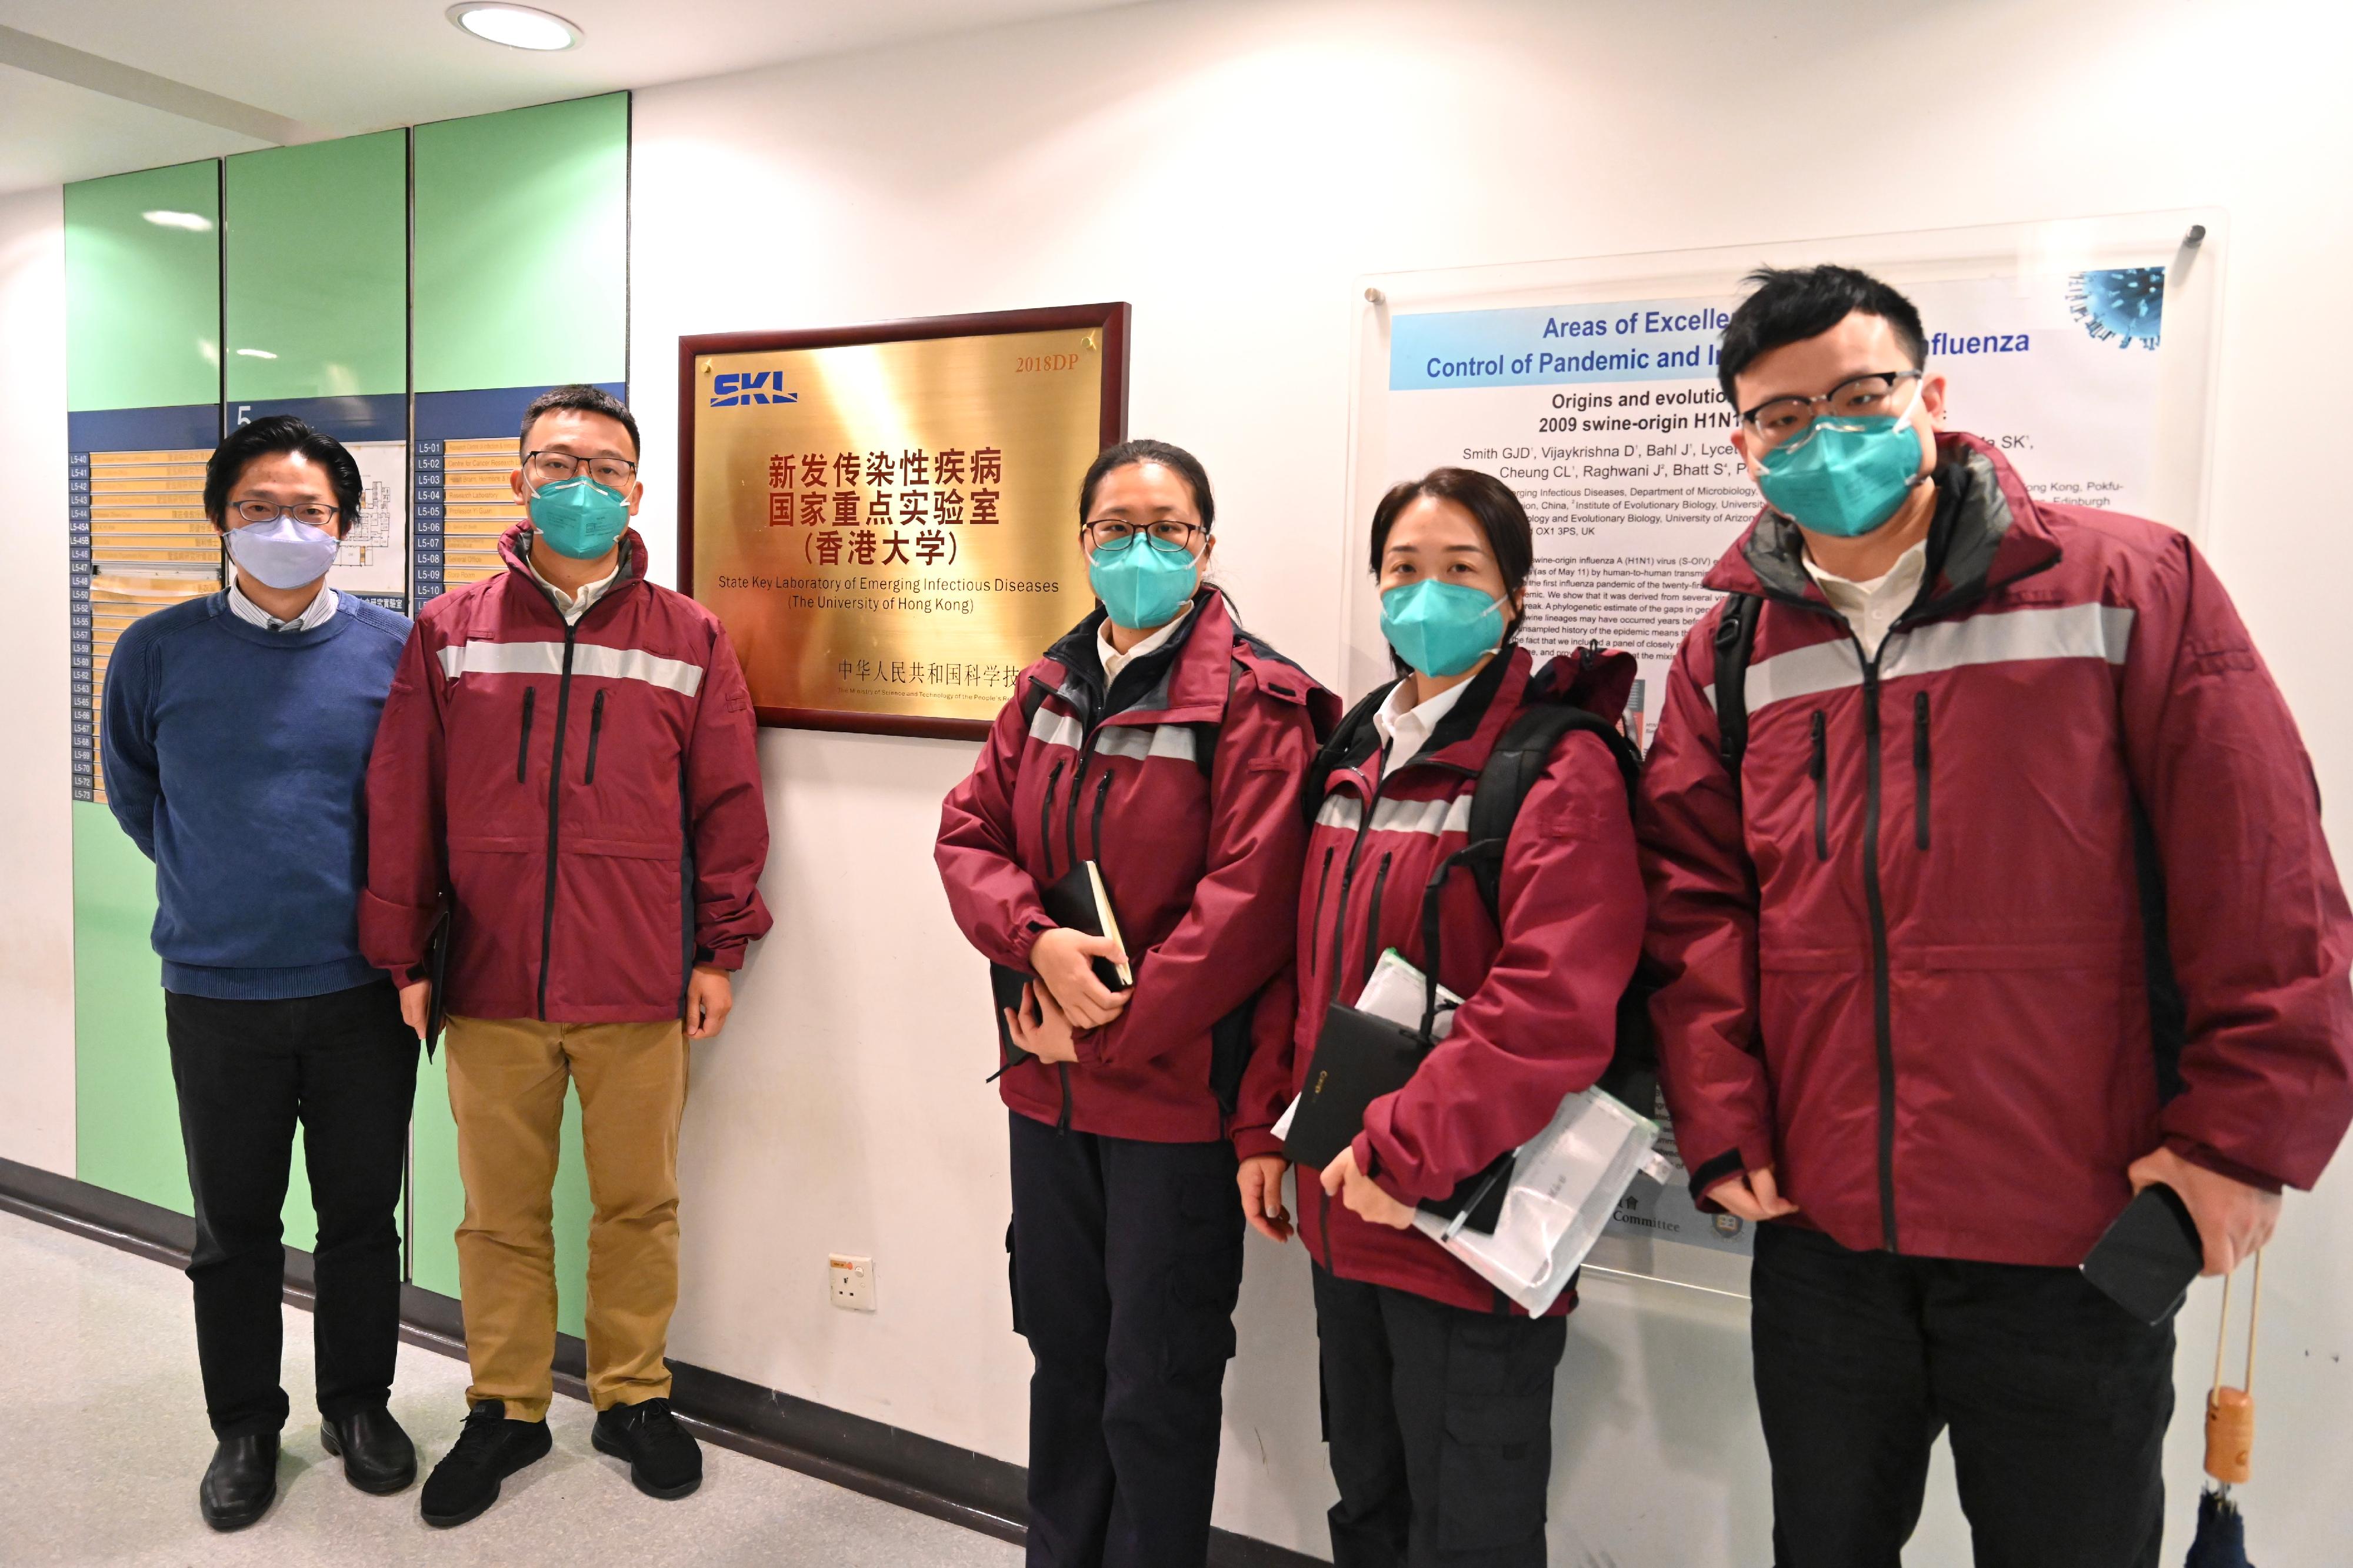 The Mainland epidemiological expert delegation and representatives of the Department of Health visited the School of Public Health of the University of Hong Kong this morning (February 21). They discussed with Professor Leo Poon and his team on the application of genome sequencing in epidemiological investigation and analyses. Photo shows the Director of Institute of Infectious Disease Control and Prevention of the Guangdong Provincial Center for Disease Control and Prevention, Mr Kang Min (second left); senior public health doctor of the Guangzhou Center for Disease Control and Prevention, Ms Chen Chun (third left); the Director of Public Health Emergency Management Department of Zhongshan Center for Disease Control and Prevention, Ms Chen Xueqin (fourth left); General Office clerk of the Guangdong Provincial Center for Disease Control and Prevention, Mr Yang Taohui (fifth left) with Professor Leo Poon (first left).